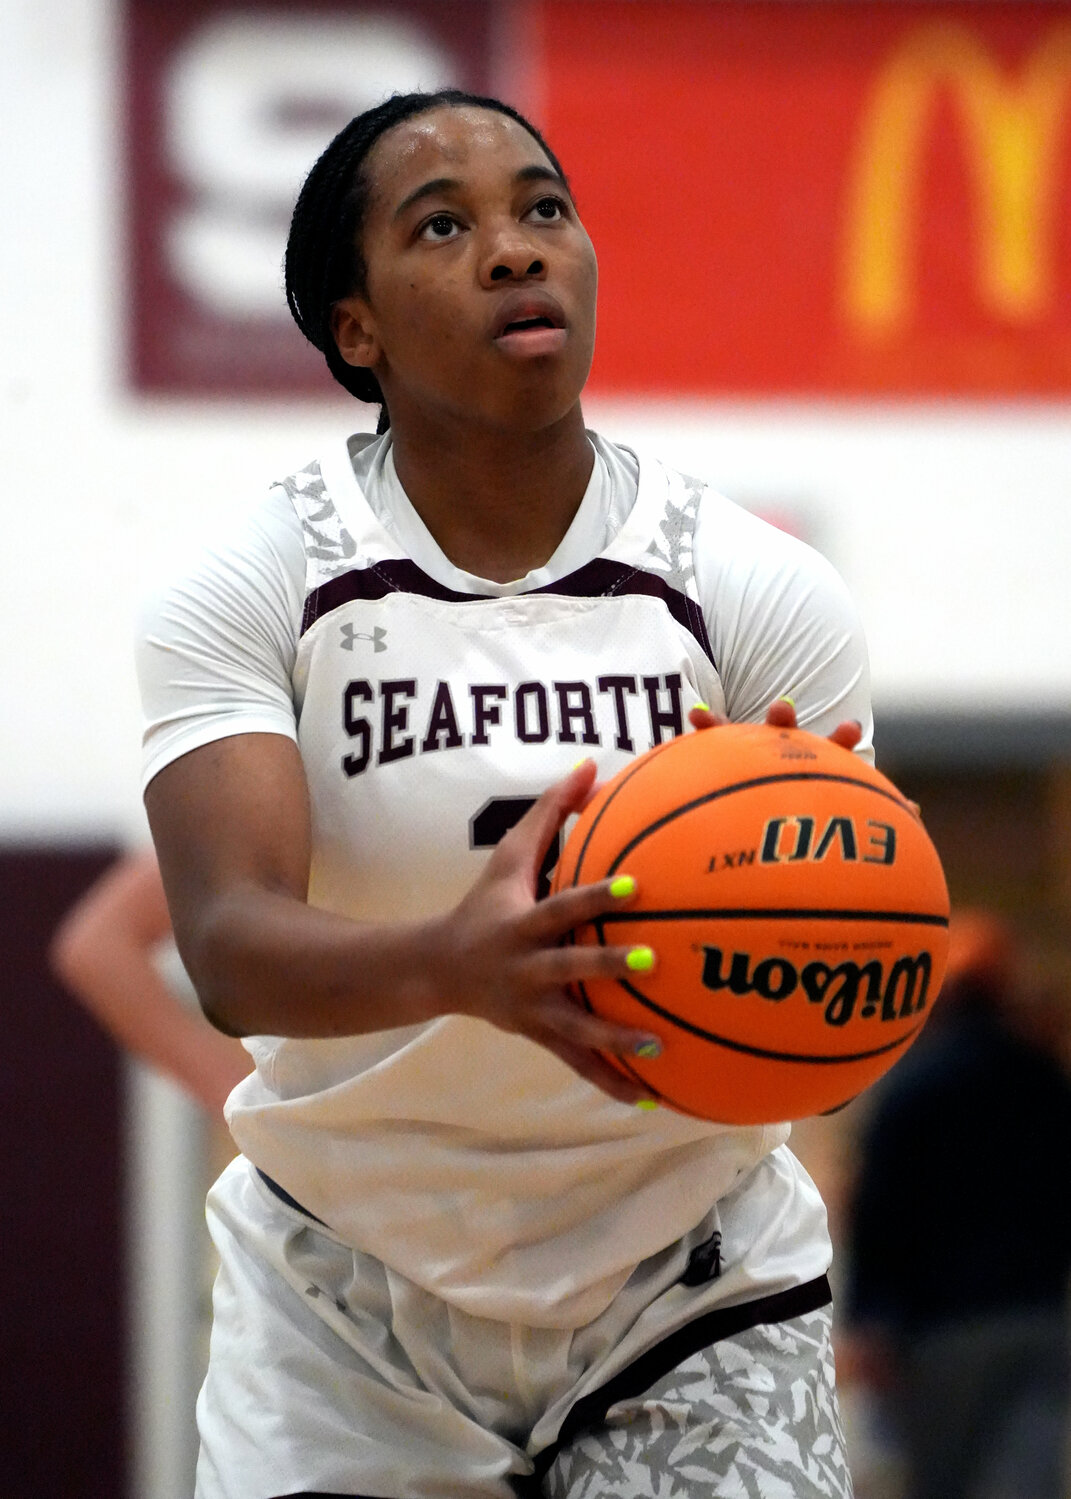 Seaforth girls basketball’s Gabby White earns athlete of the week honors for the week of Nov. 20.